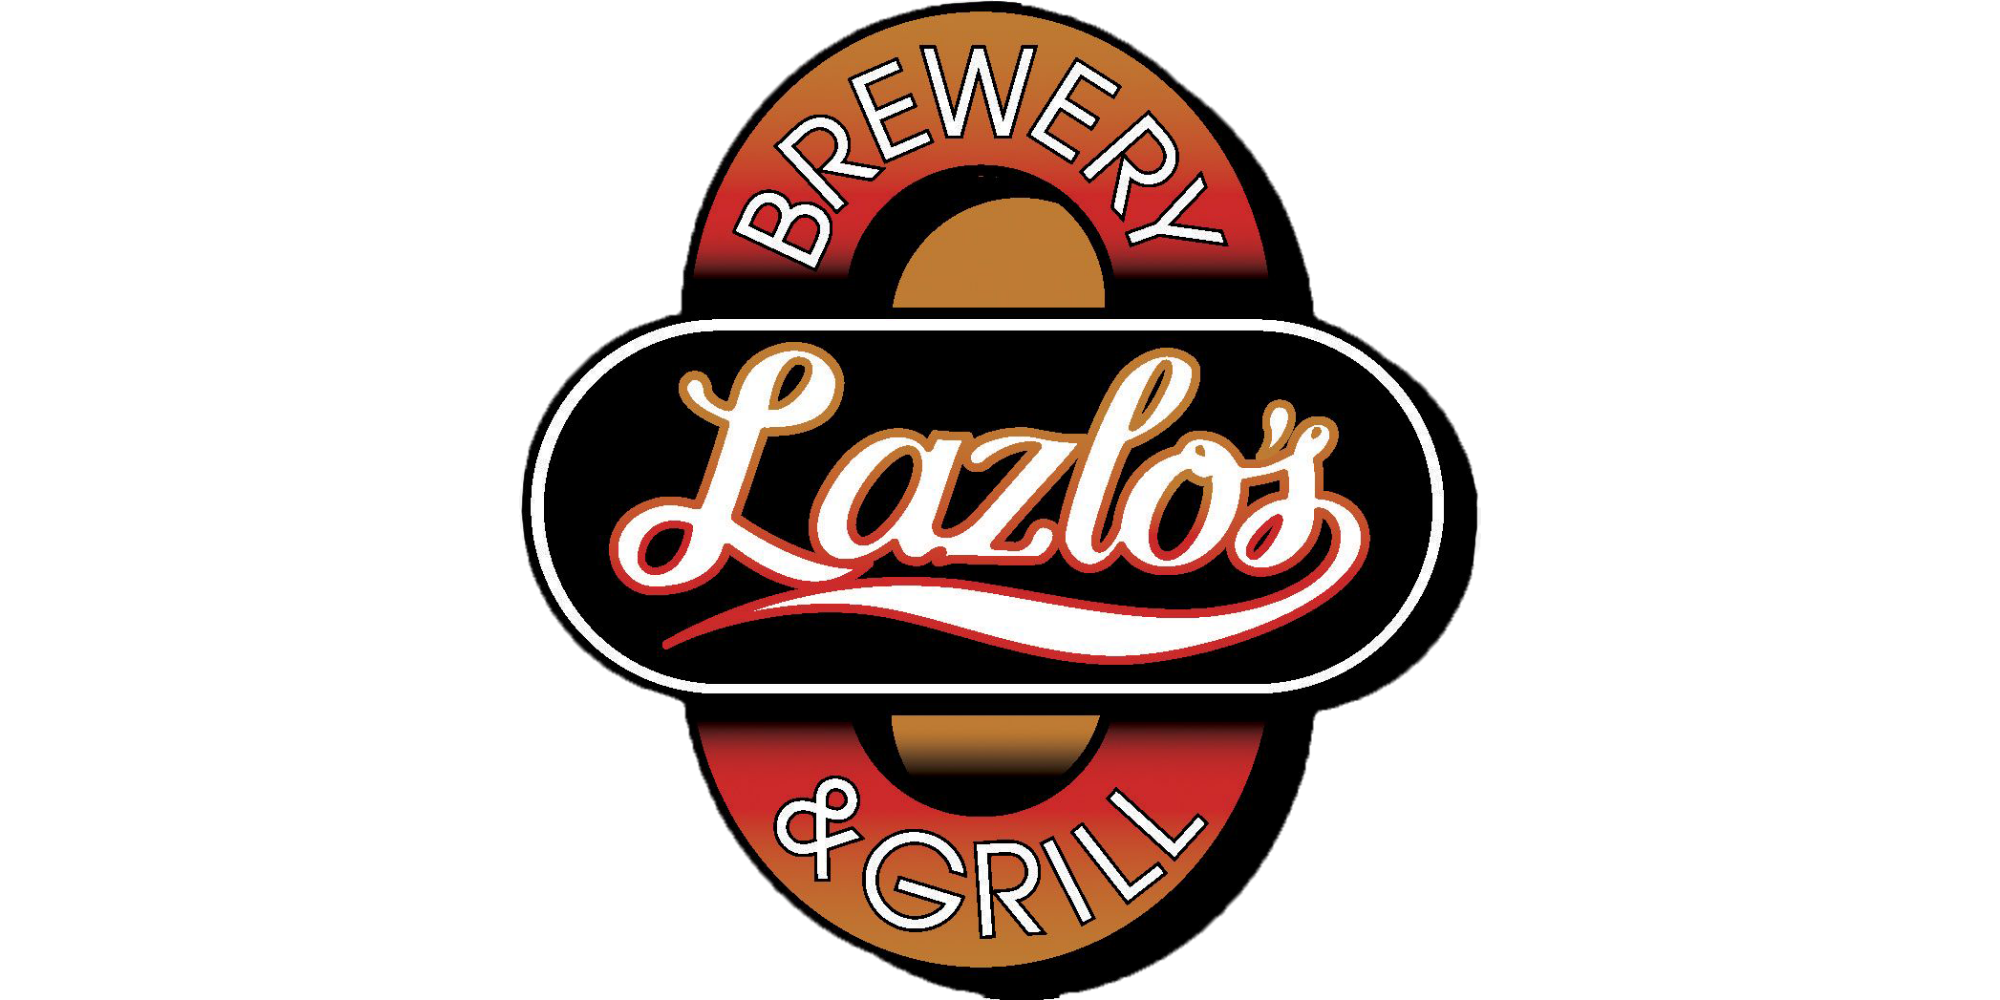 Lazlo's Brewery & Grill